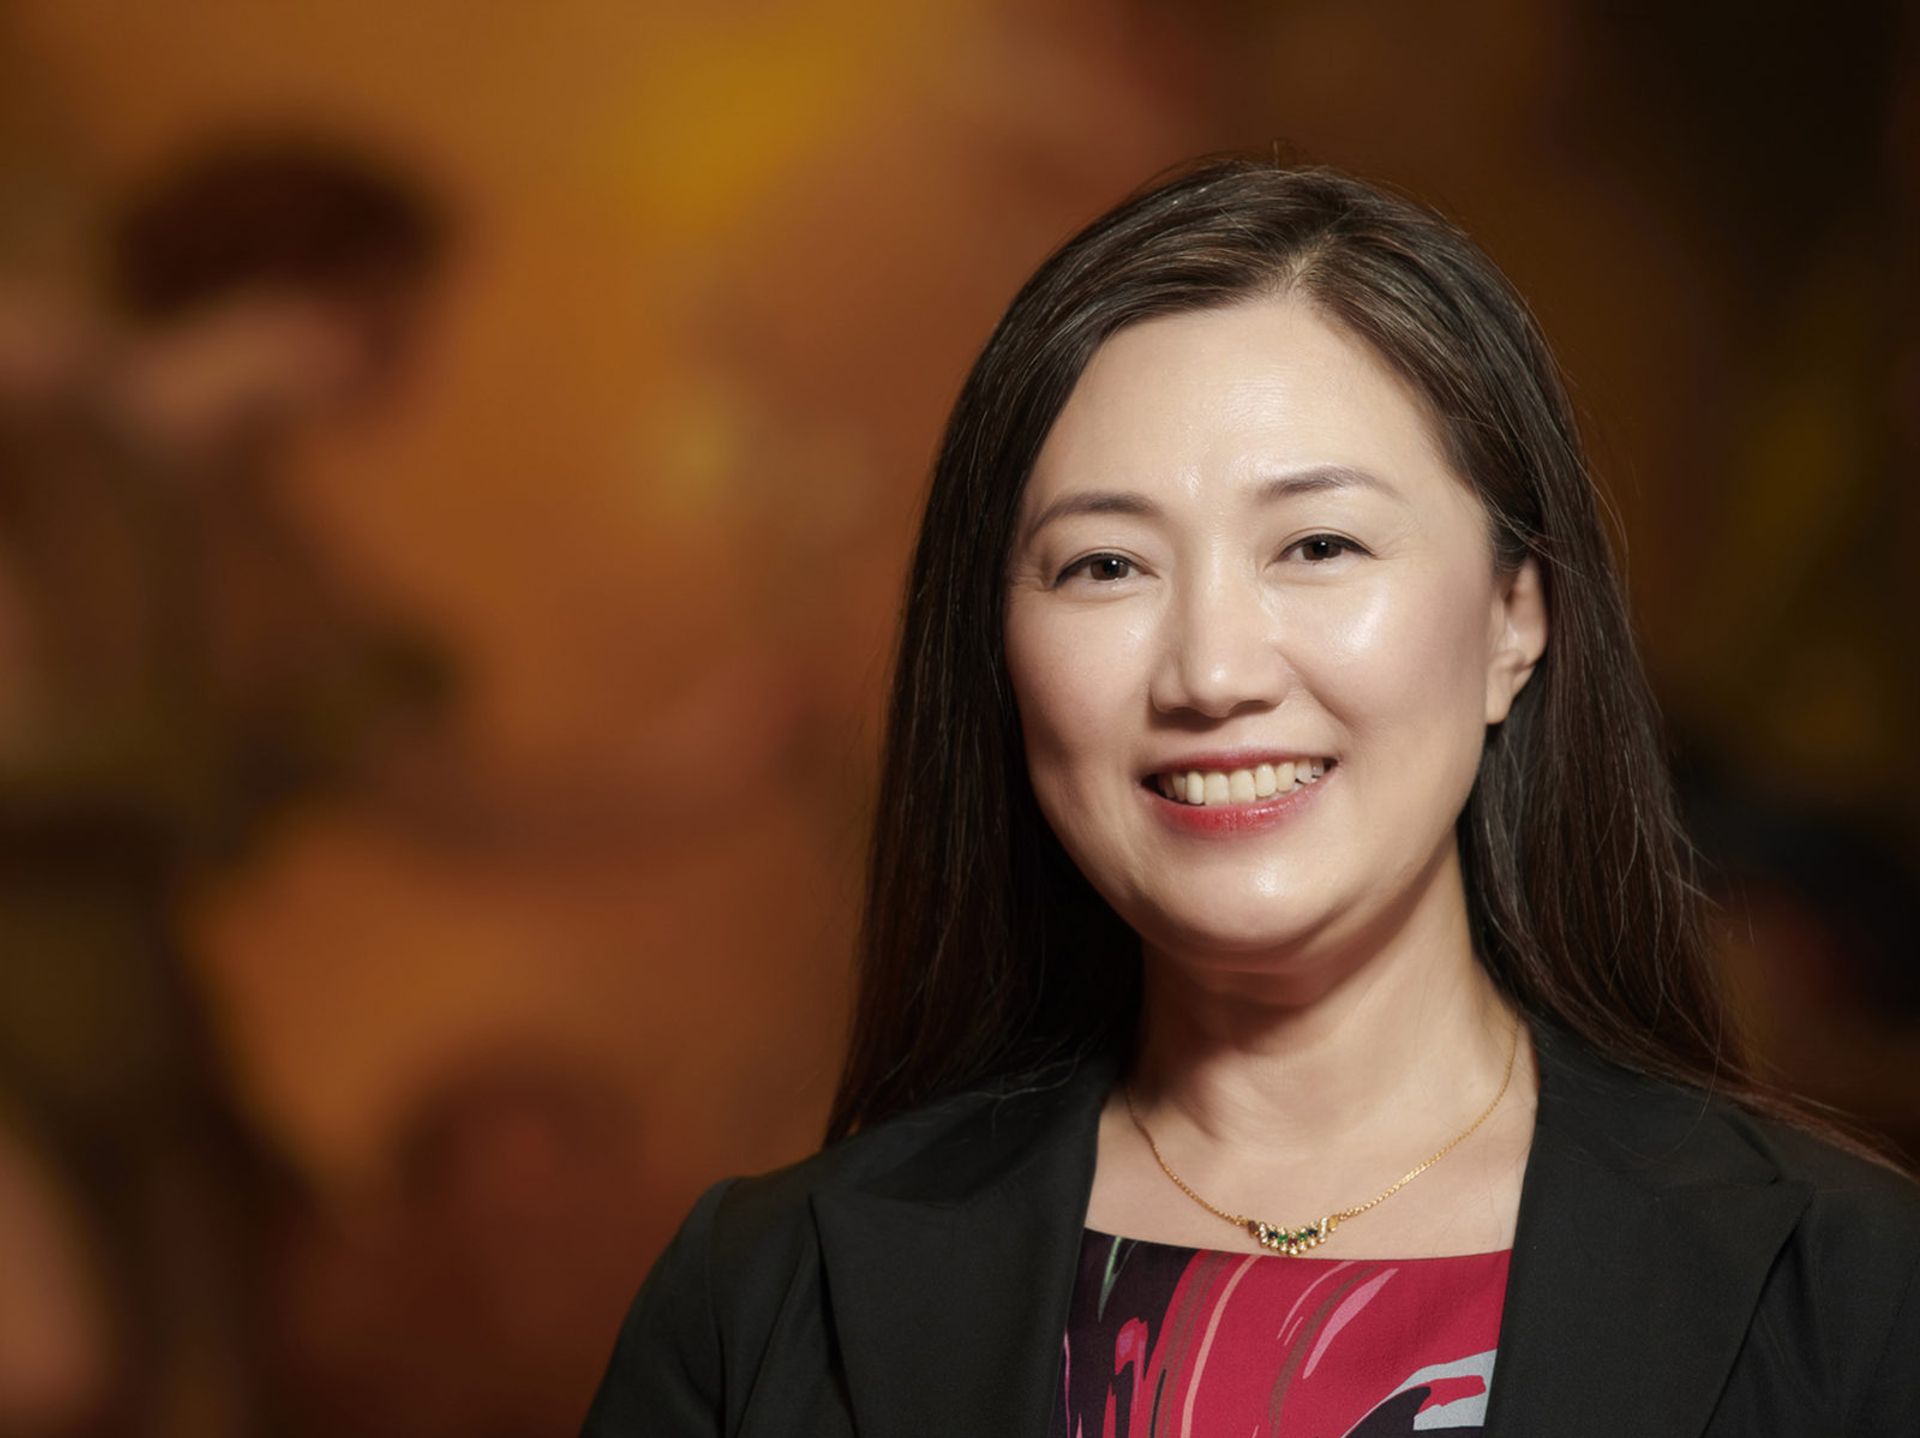 Min Jung Kim, the incoming director of the Saint Louis Art Museum Saint Louis Art Museum